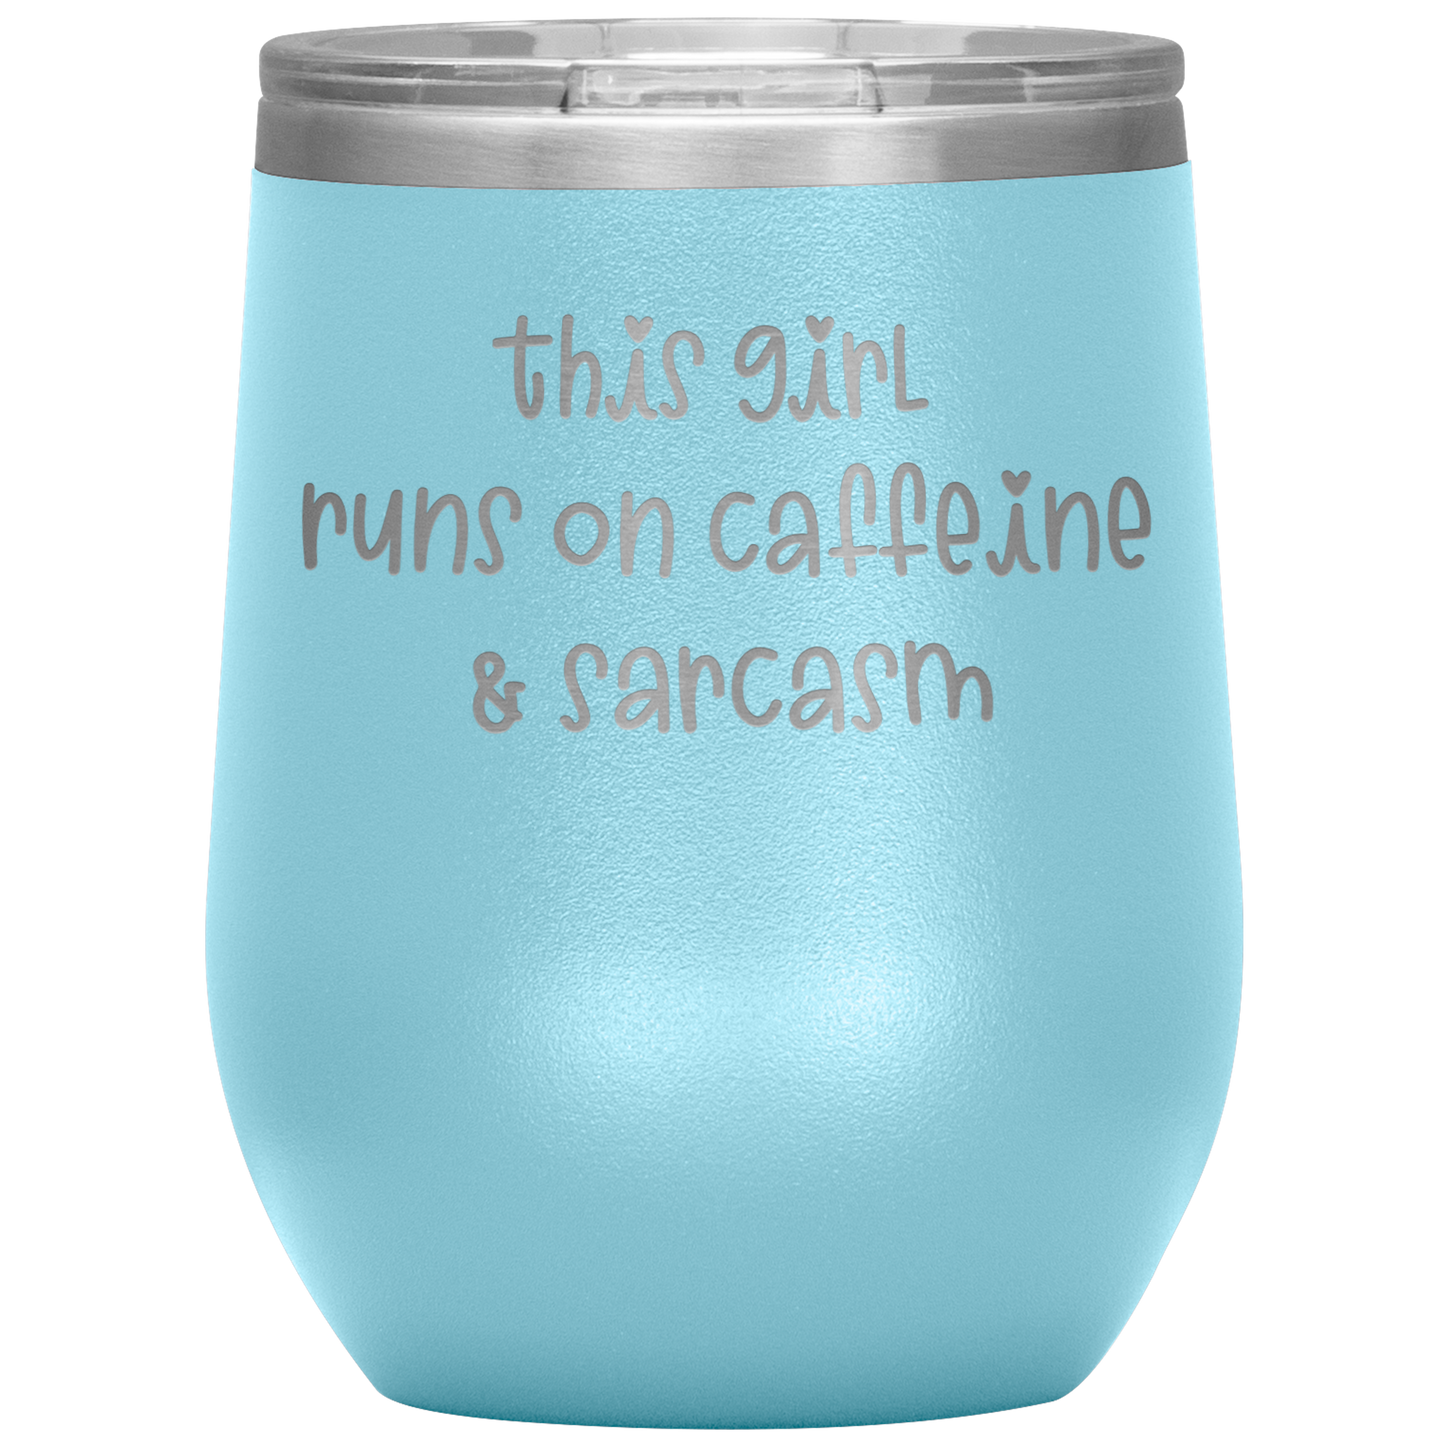 "This Girl Runs on Caffeine & Sarcasm" 12 oz. Insulated Stainless Steel Wine Tumbler with Lid